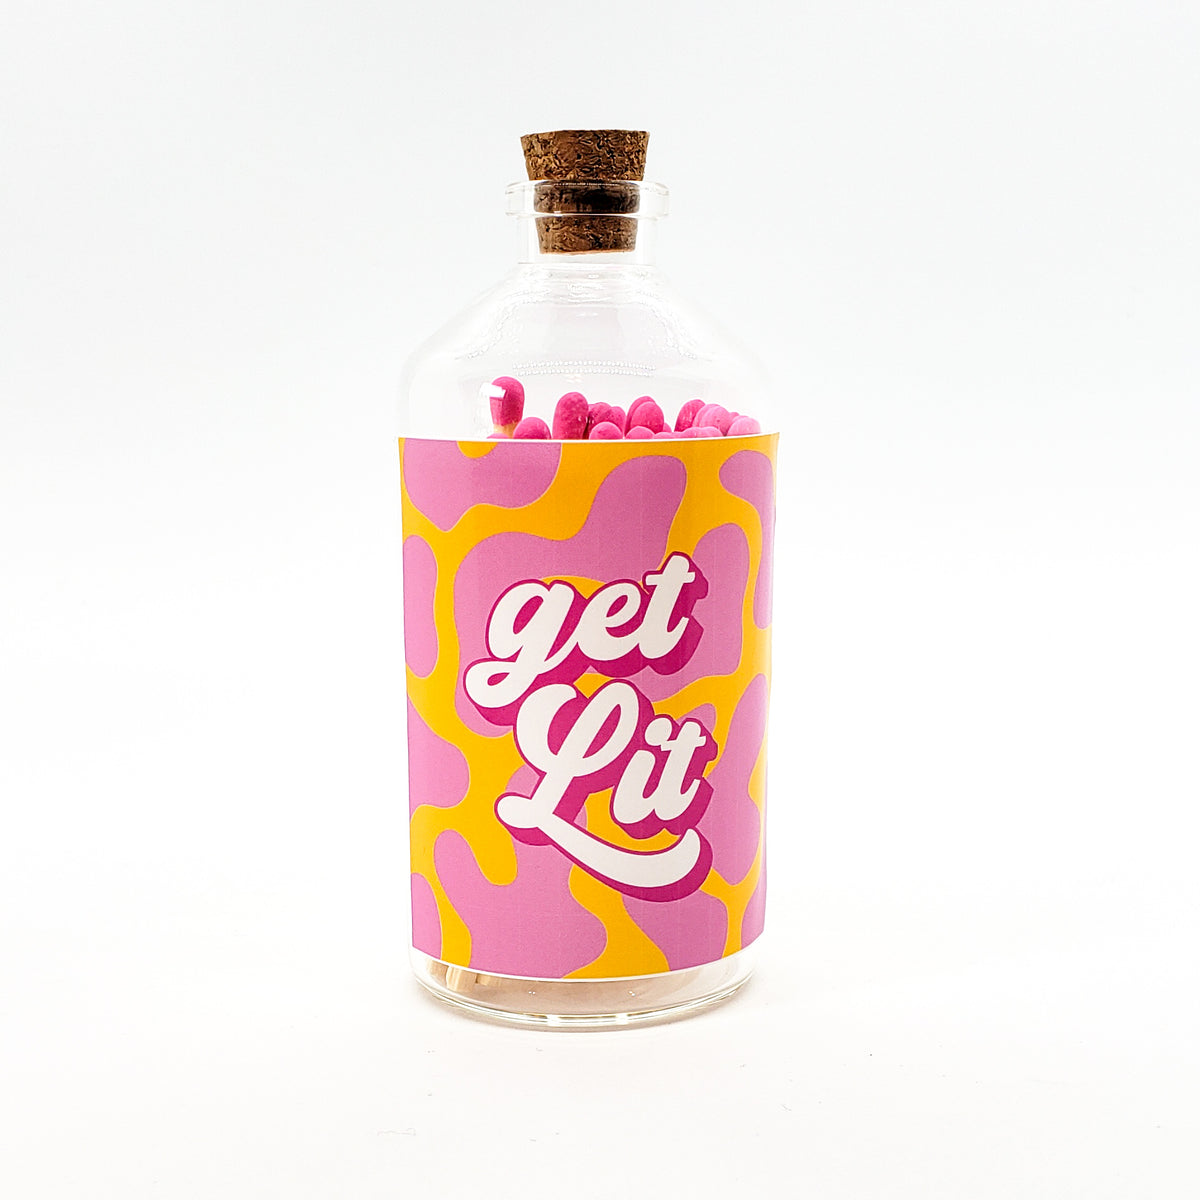 Get Lit - Colorful Matches in Glass Jar